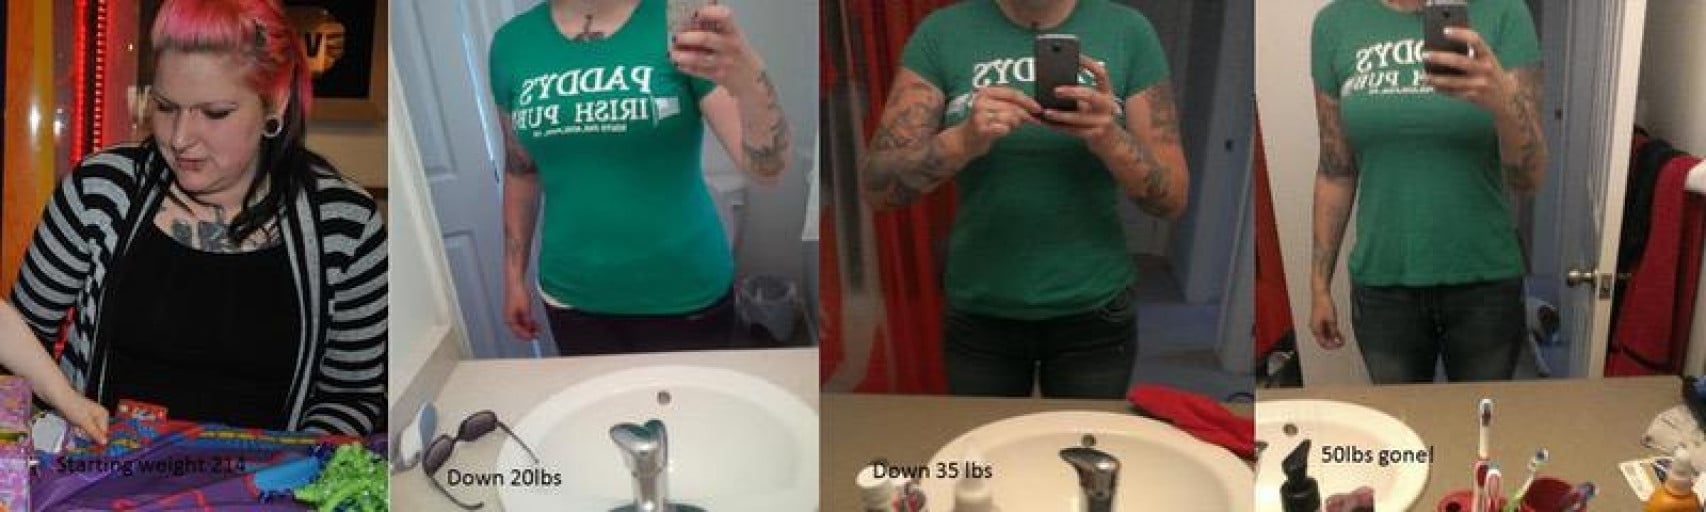 5 foot 11 Female Before and After 50 lbs Weight Loss 214 lbs to 164 lbs